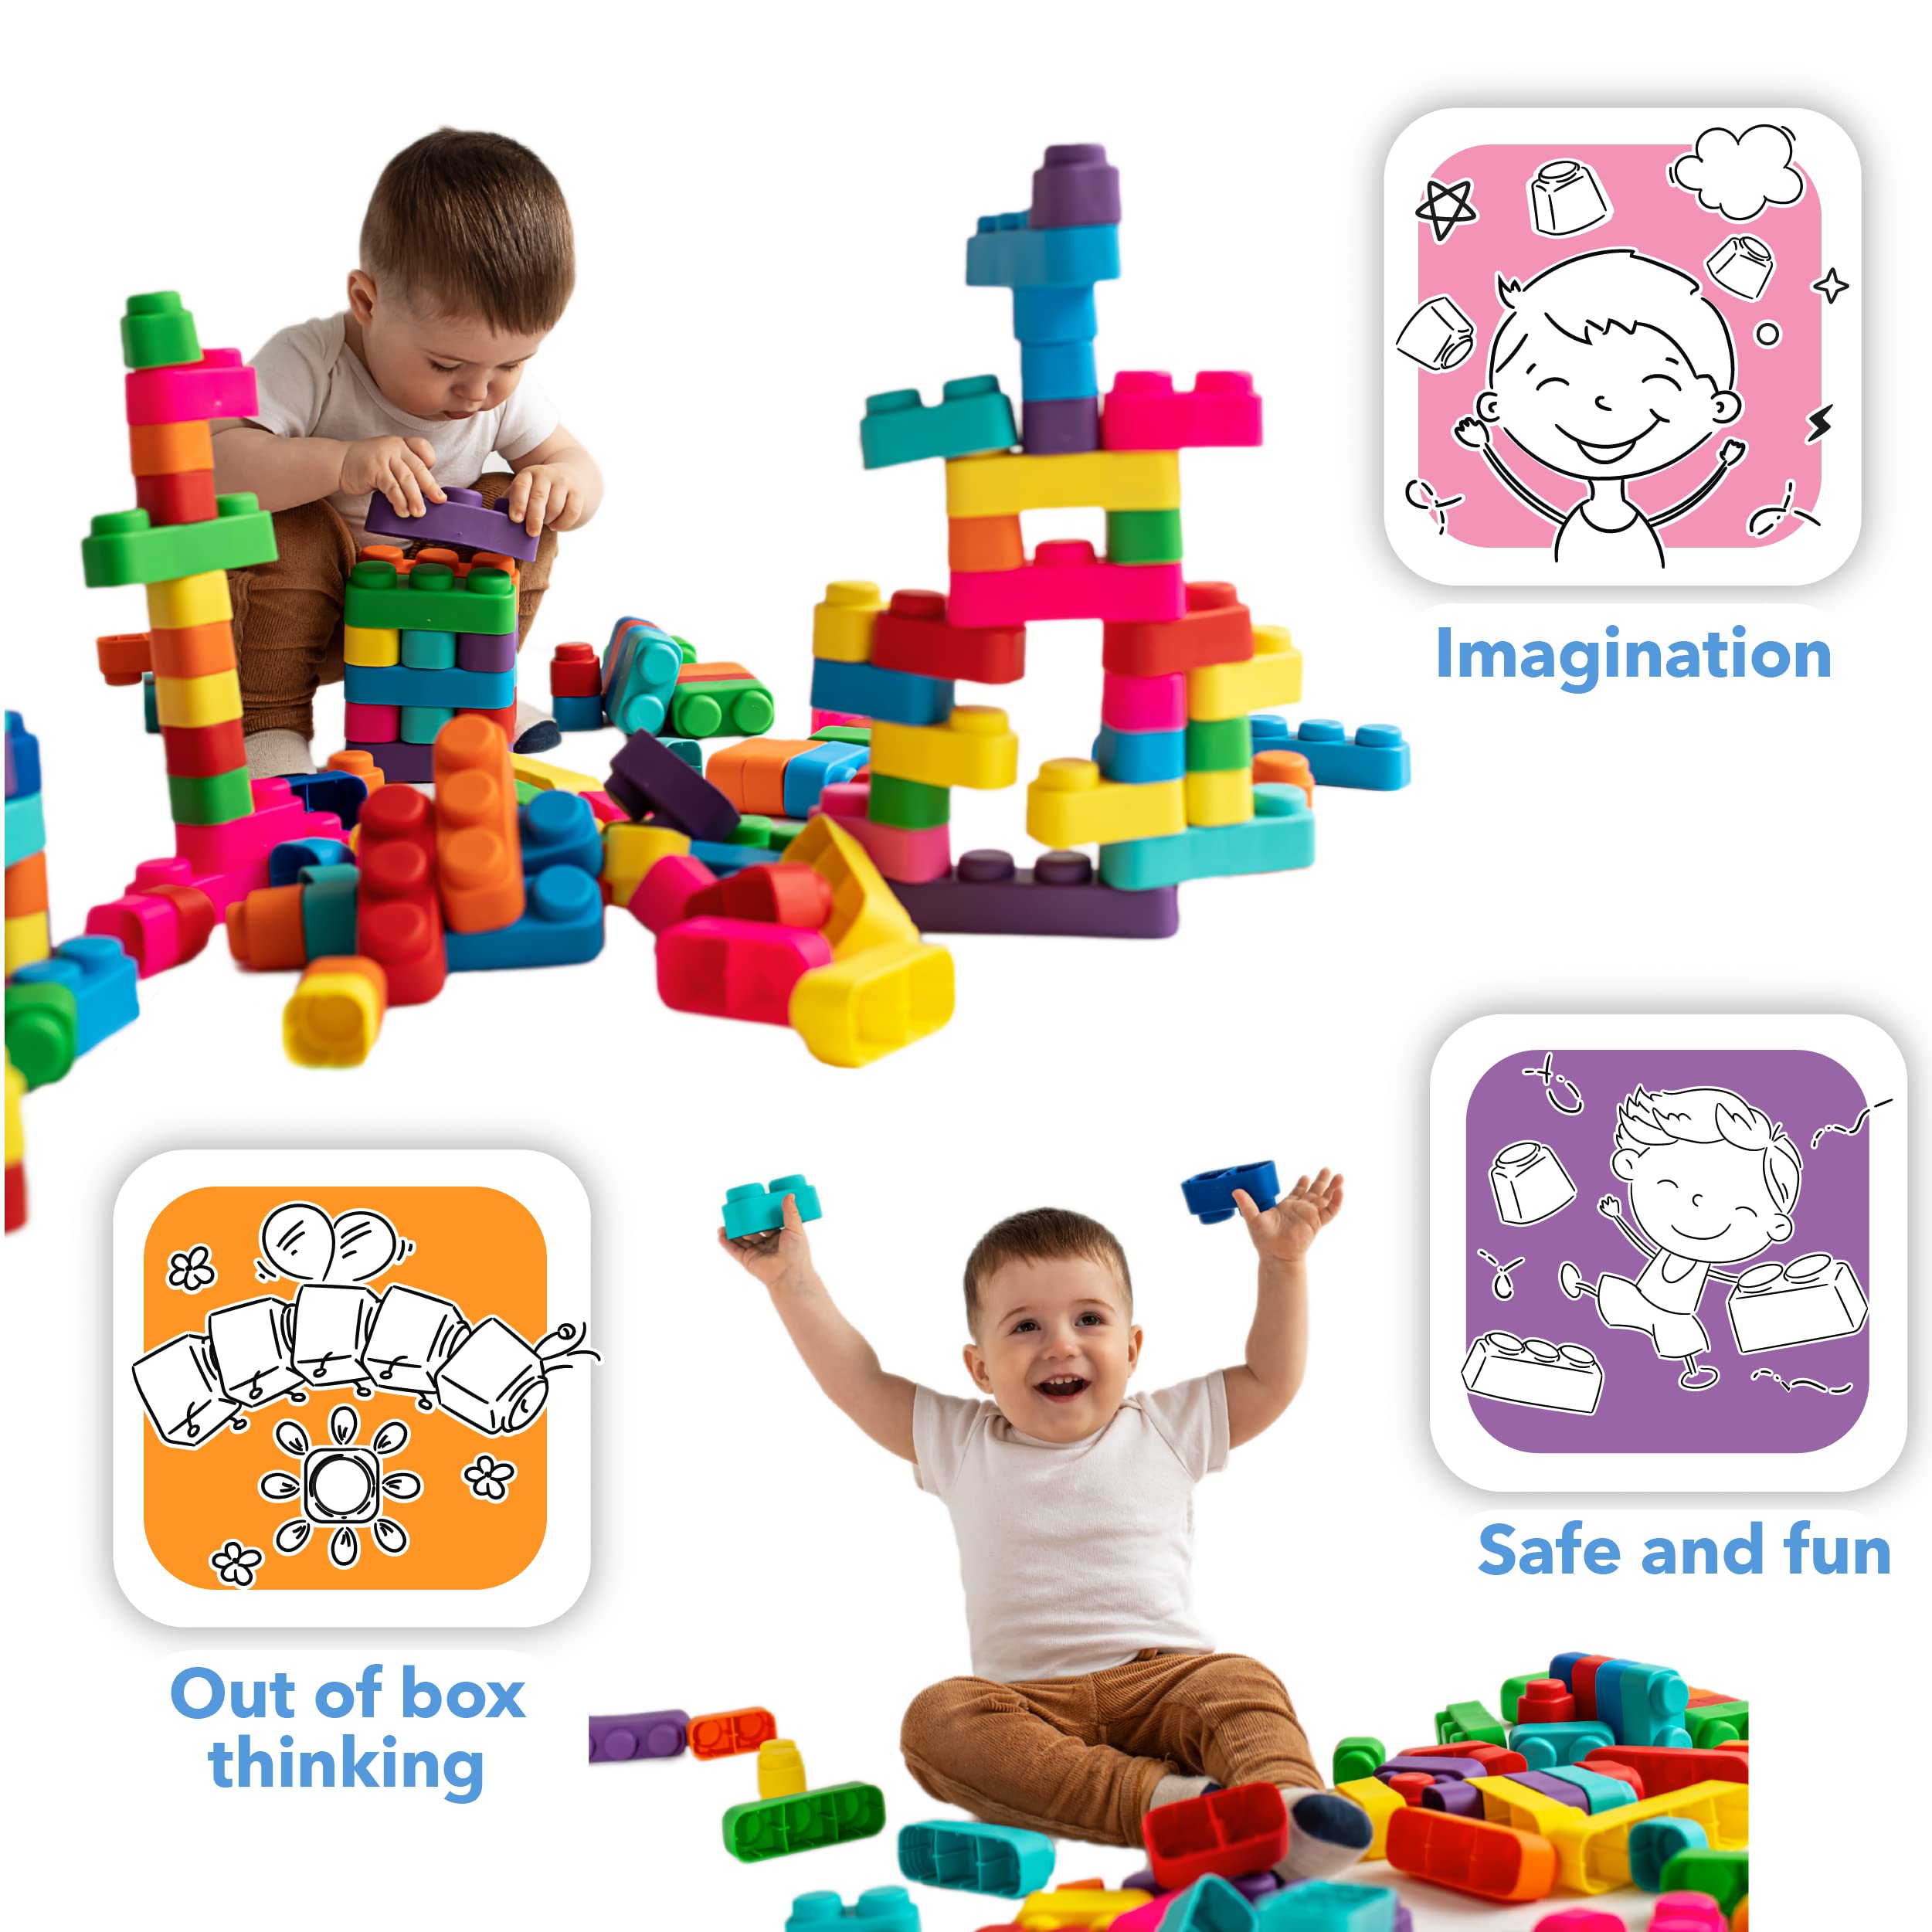 Far far land -Super Soft Building Blocks for Toddlers Ages 1-3 Years– Teaches & Enhances Creativity and Fine Motor Skills- STEM Building Set - 42 Pieces